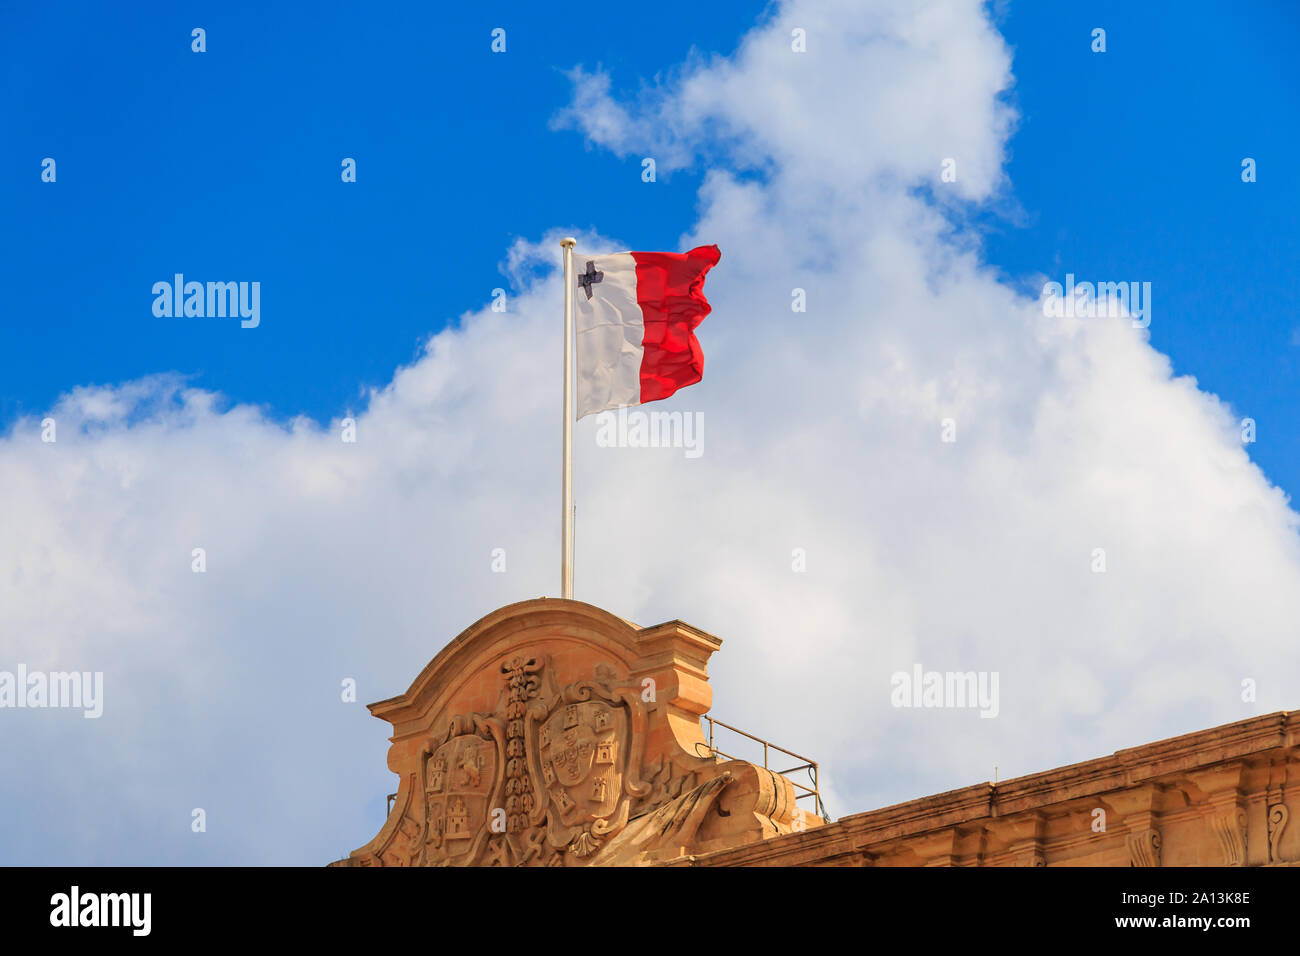 Malta national flag is waving in deep blue sky background Stock Photo